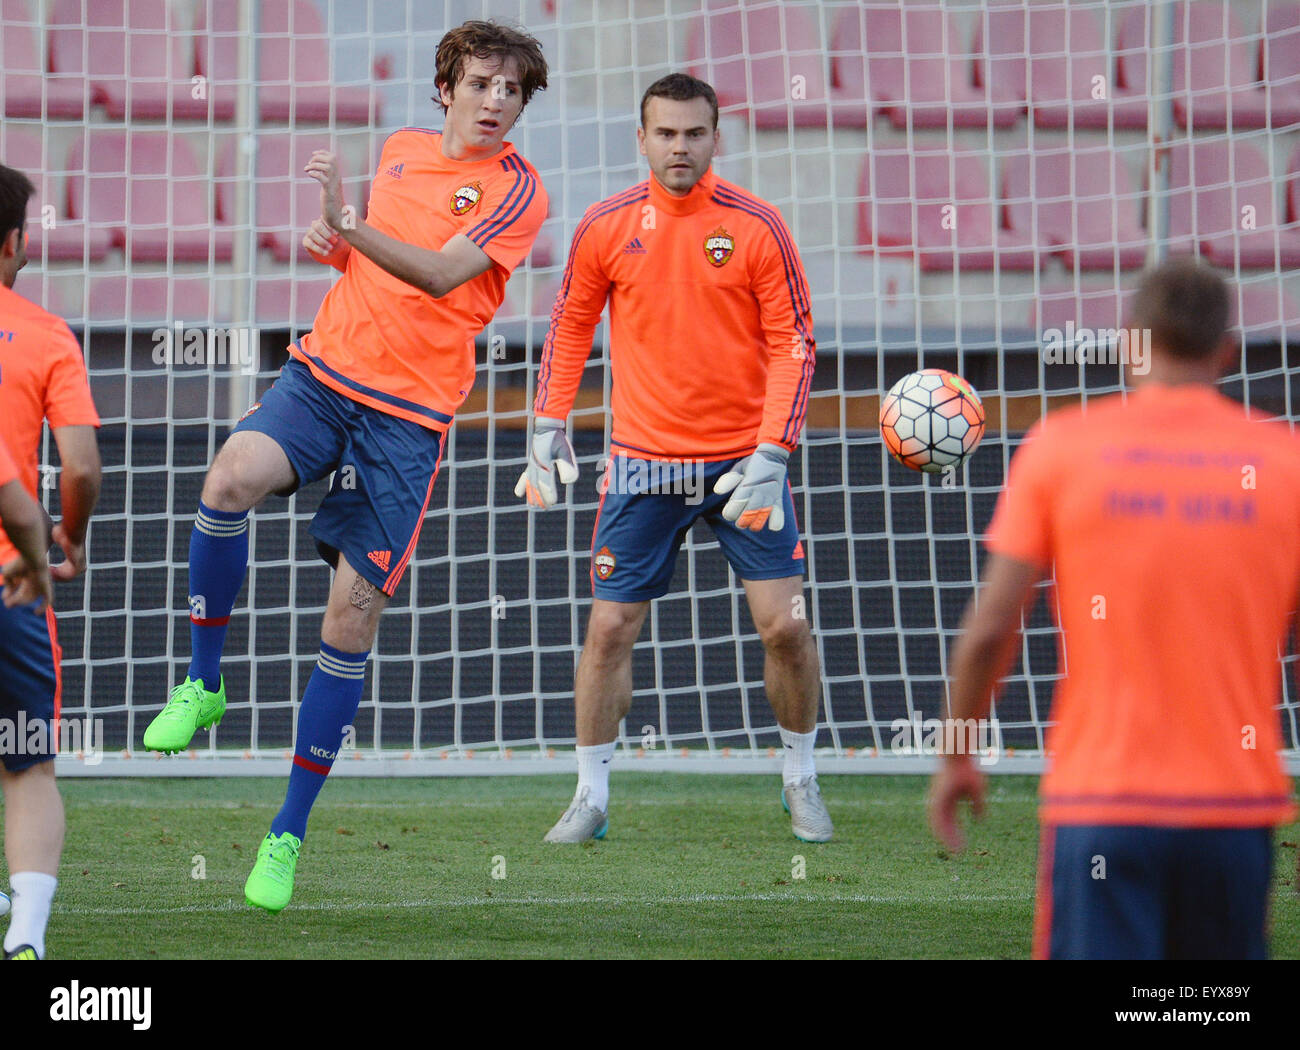 Soccer player Mario Fernandes (left) and goalkeeper Igor Akinfeev of CSKA Moscow train prior to the third qualifying round of the Champions League return match between Sparta Prague and CSKA Moscow in Prague, Czech Republic, on Tuesday, August 4, 2015. (CTK Photo/Michal Dolezal) Stock Photo